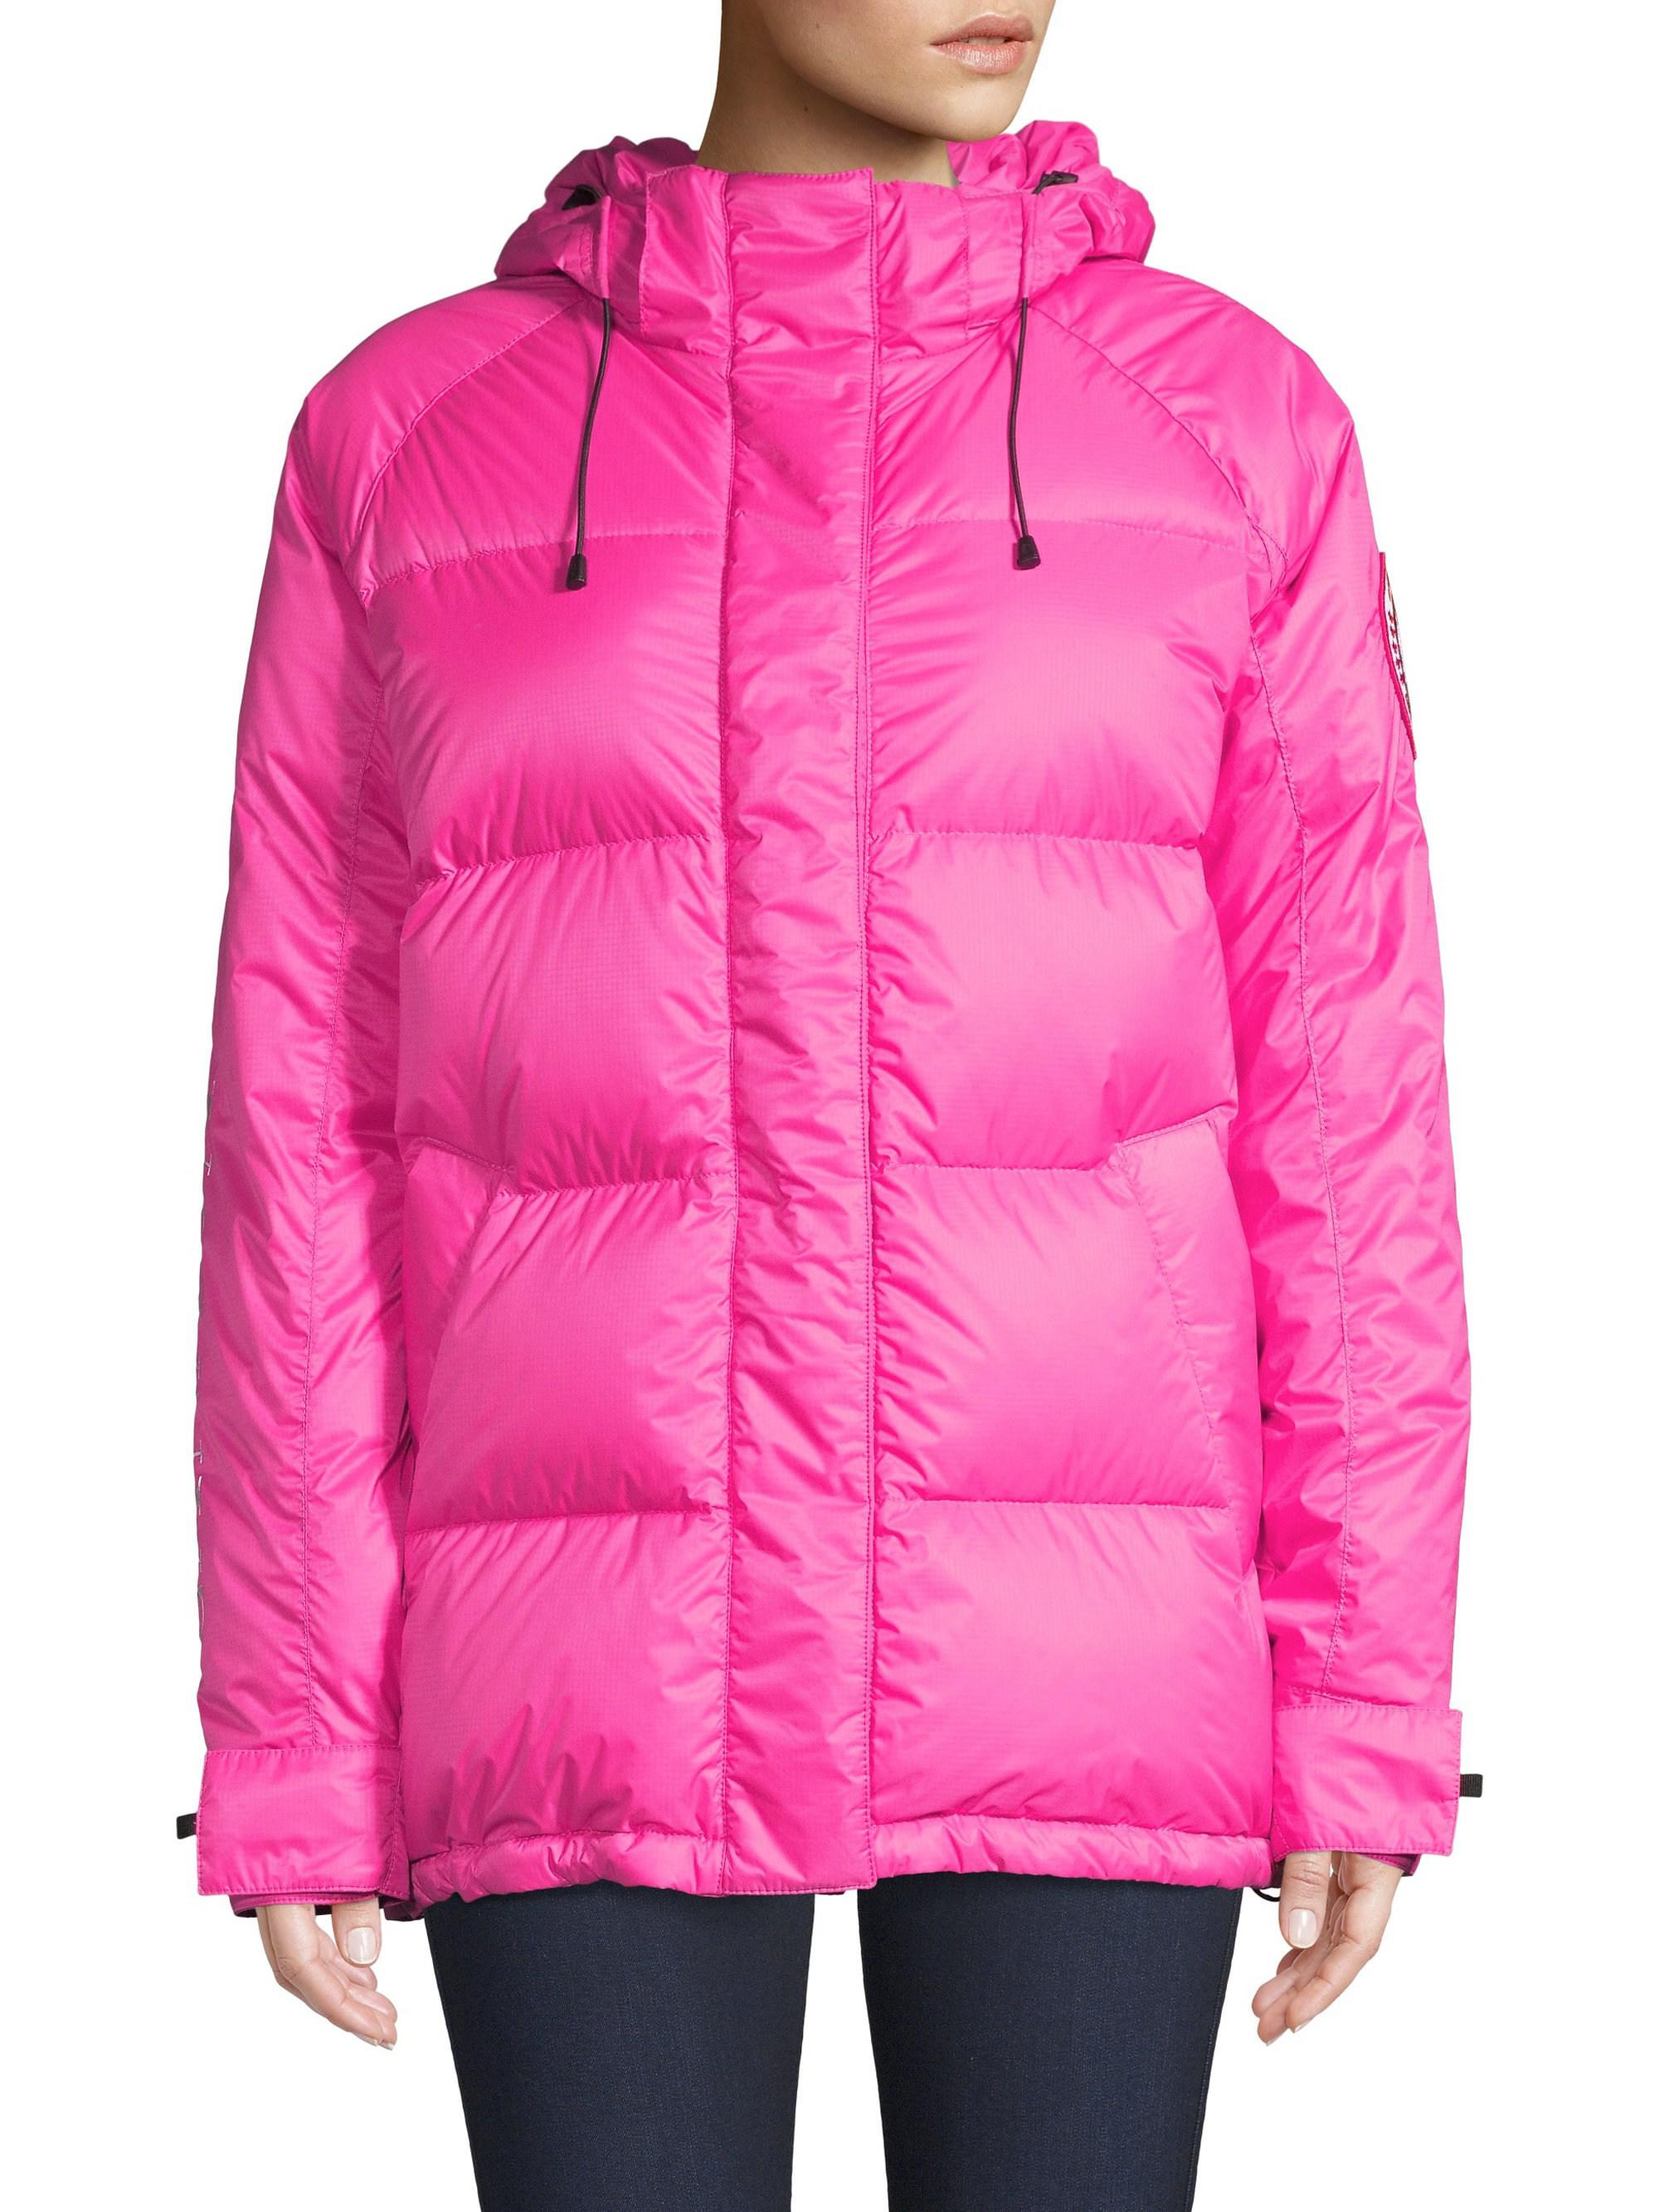 Canada Goose Approach Jacket Pink Portugal, SAVE 53% - lutheranems.com